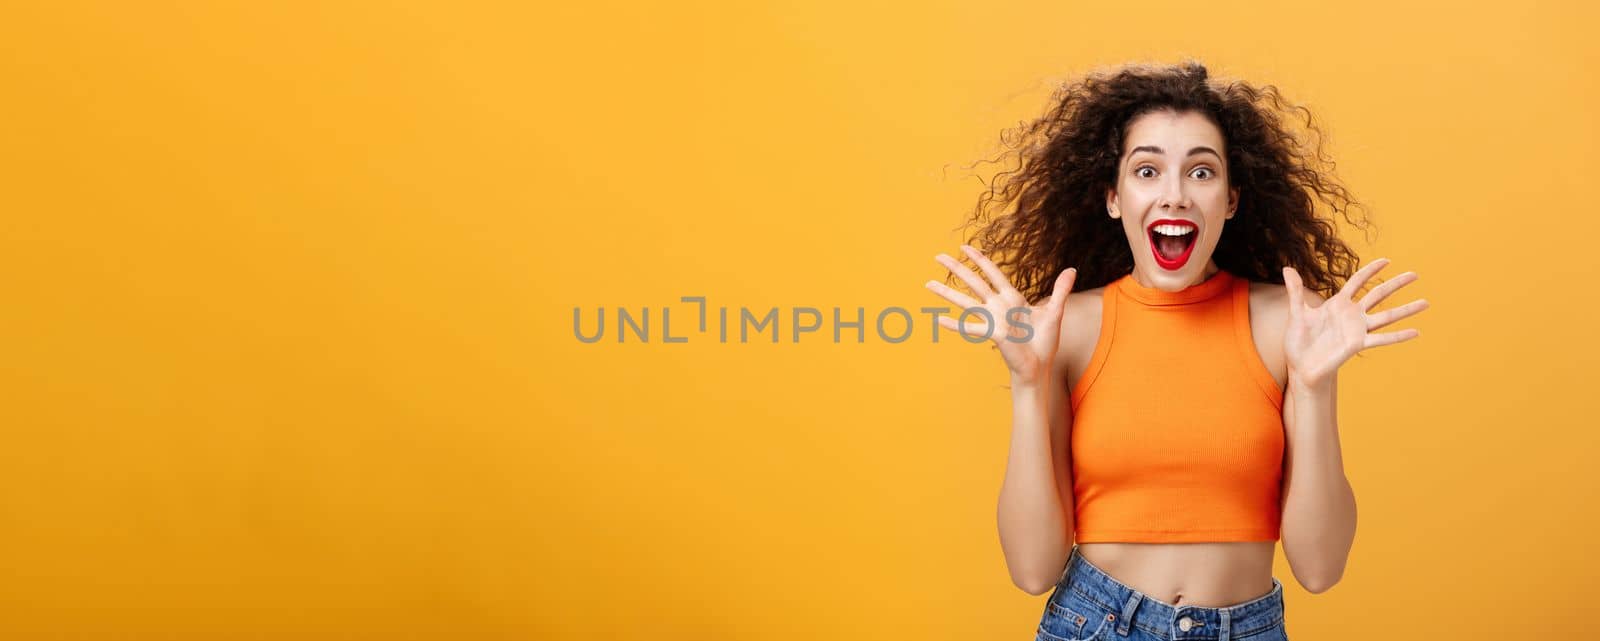 Excited impressed attractive stylish woman with nose ring, red lipstick and curly hairstyle smiling amazed with opened mouth gesturing with raised palms being astonished over orange background. Emotions concept